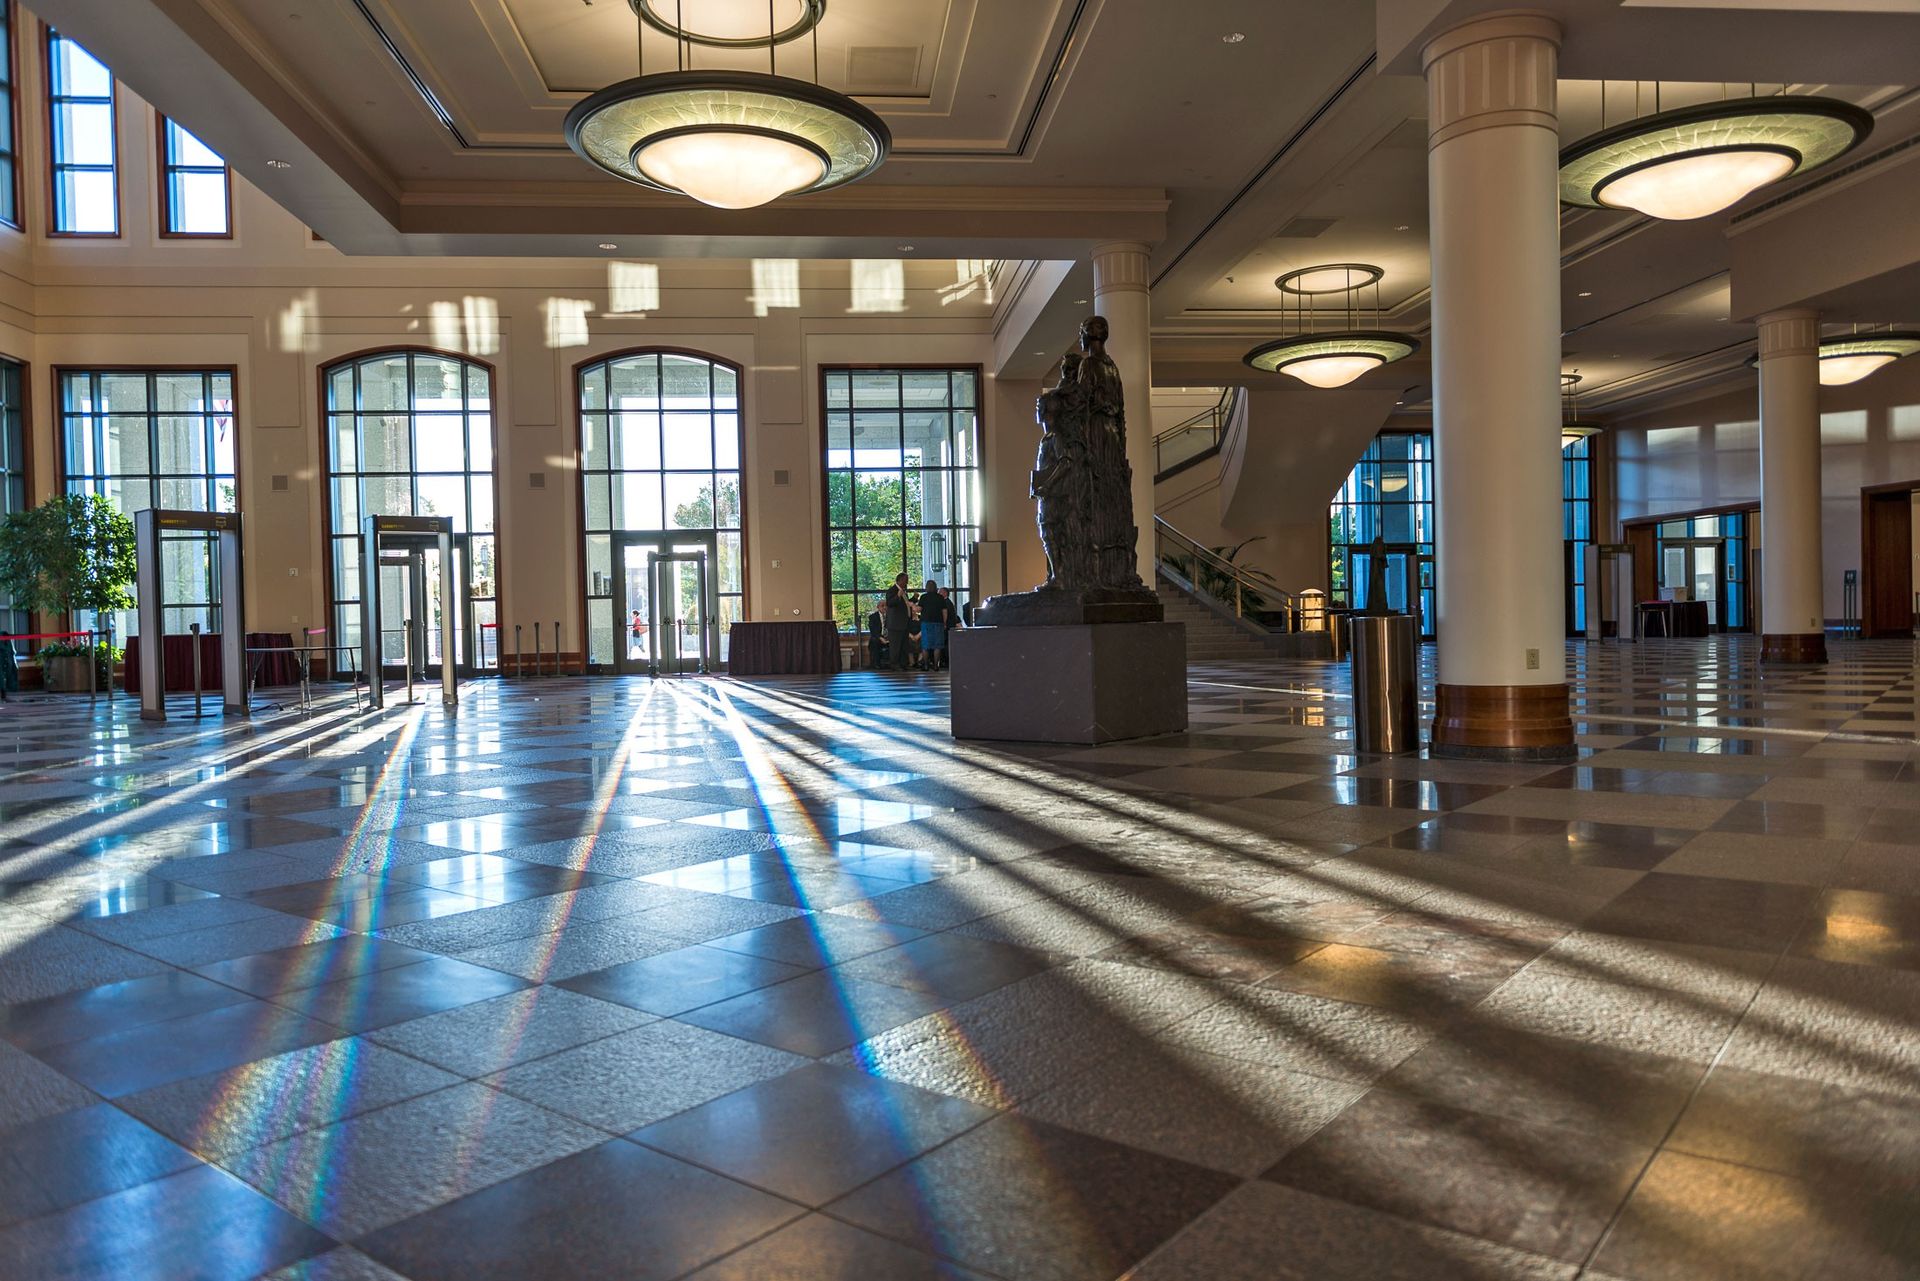 The hall inside the Conference Center entrance.